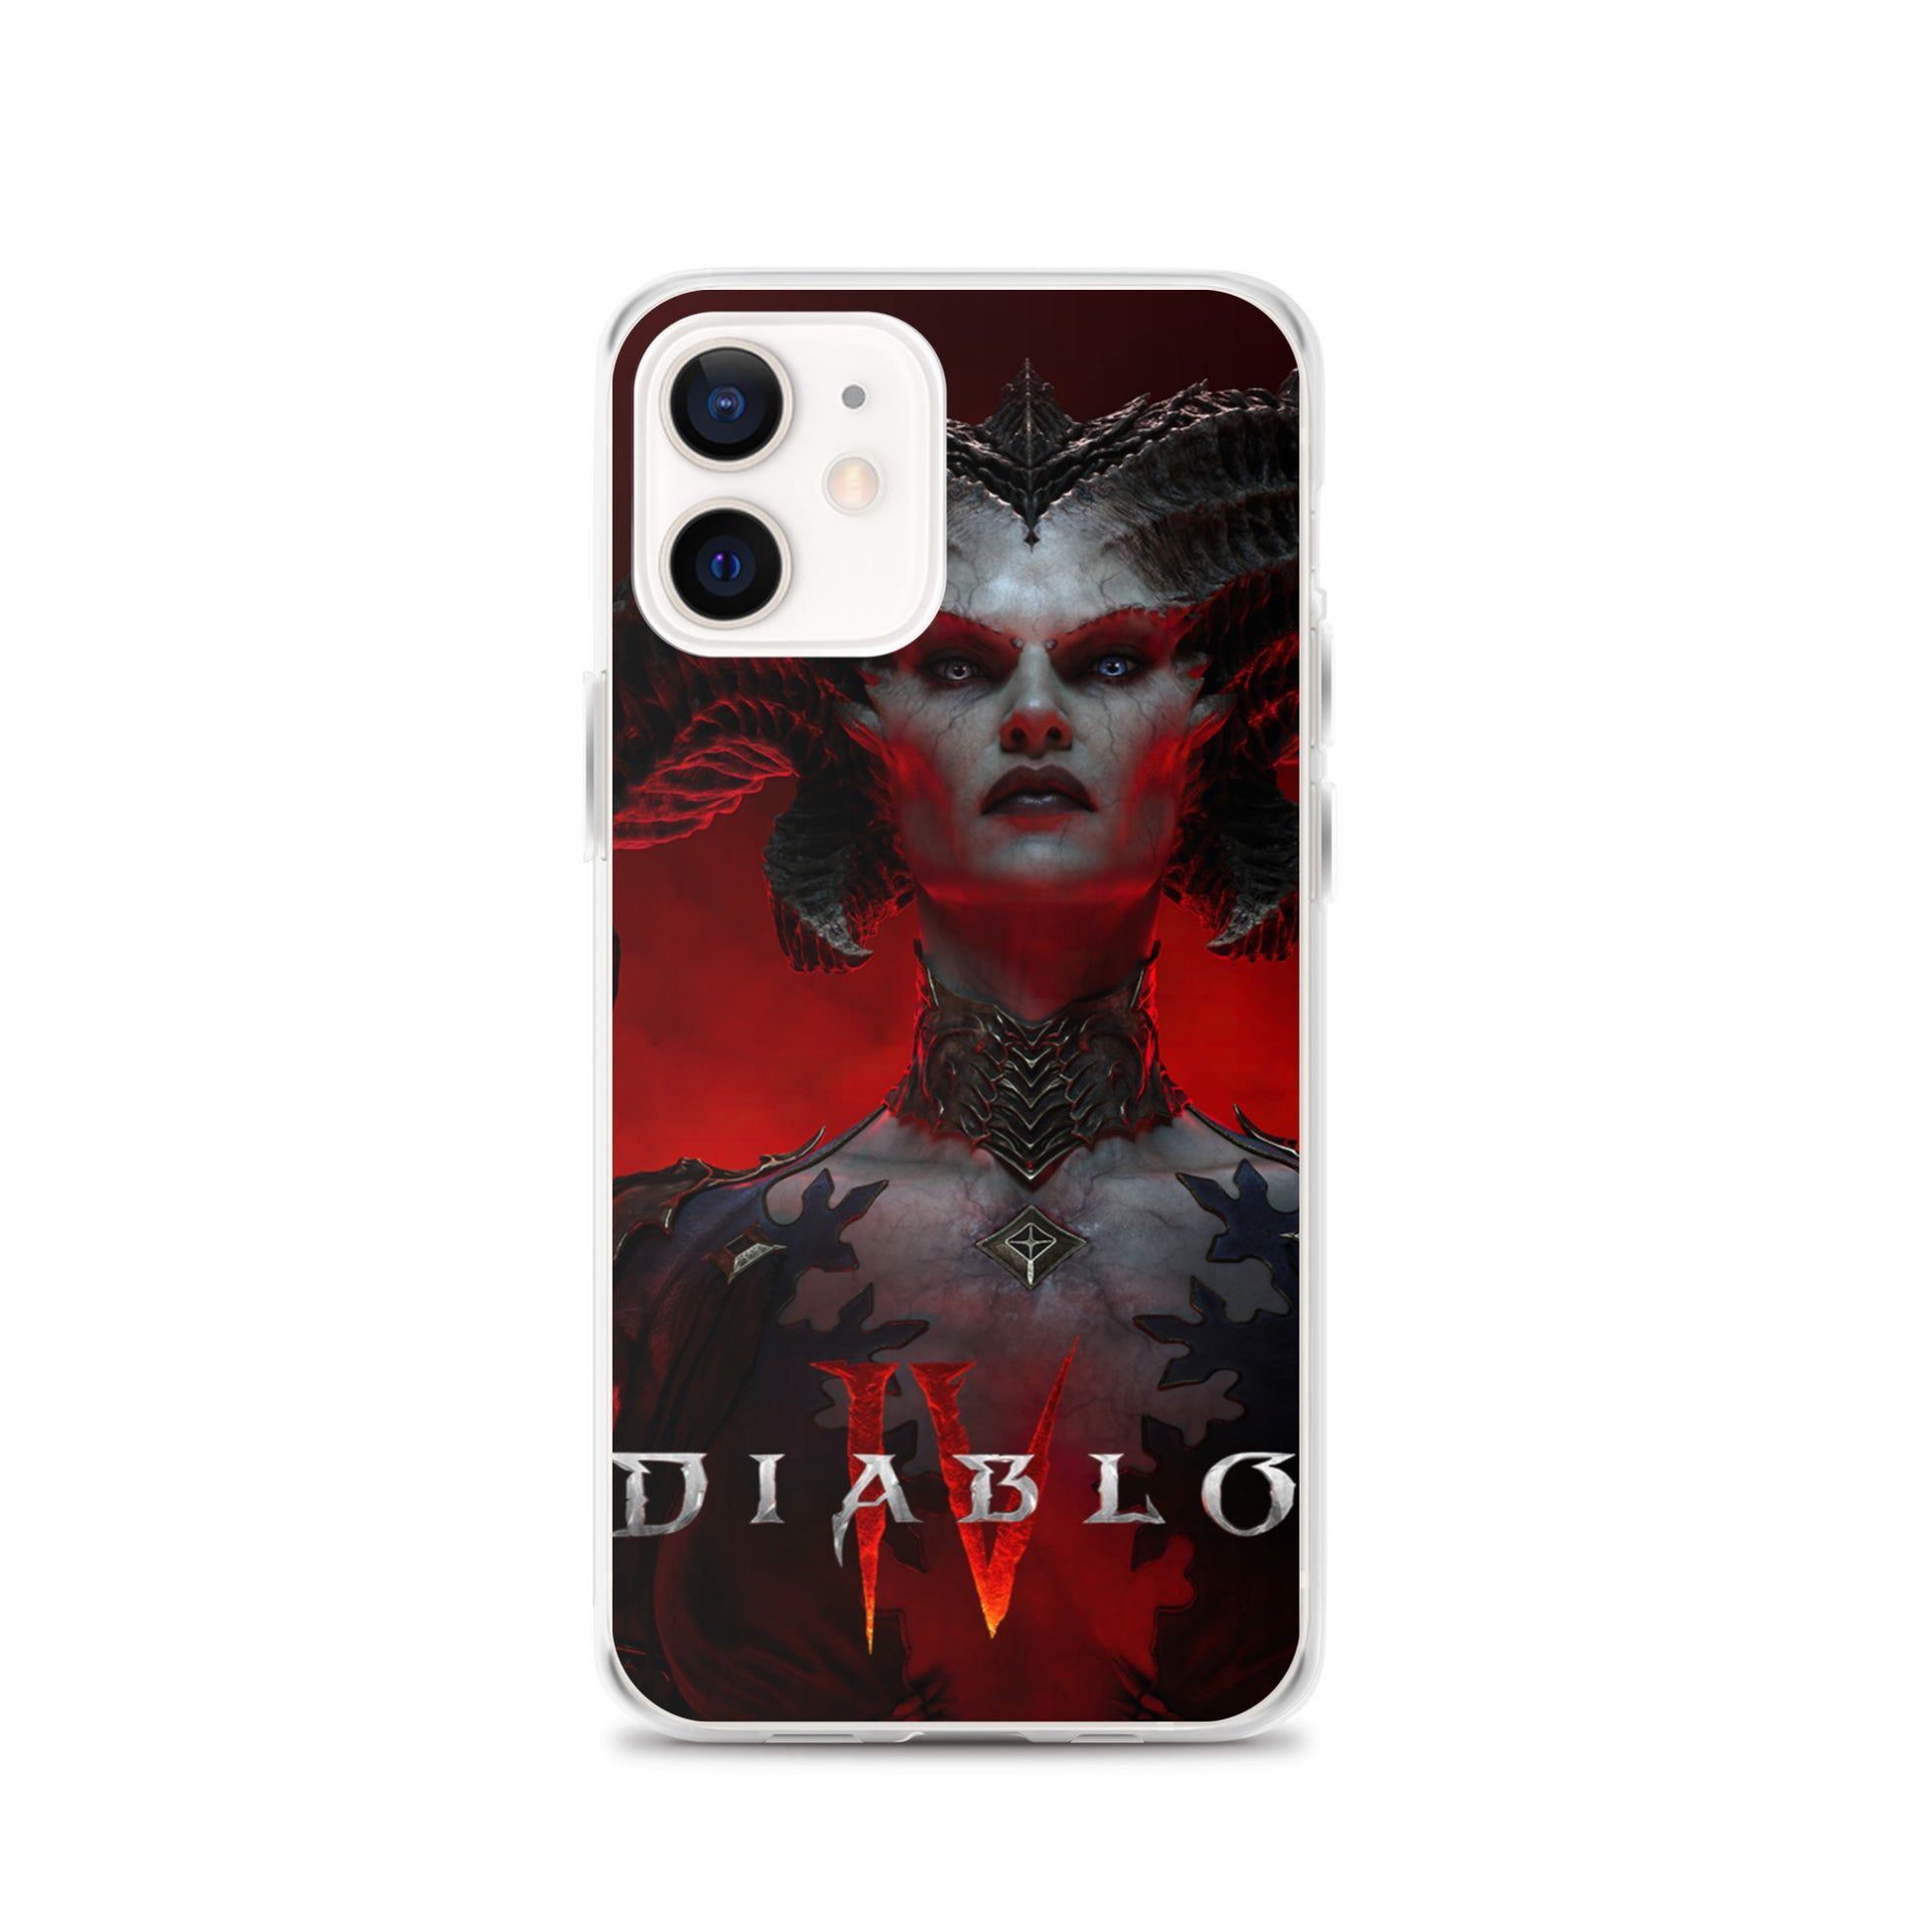 Lilith on a phone case